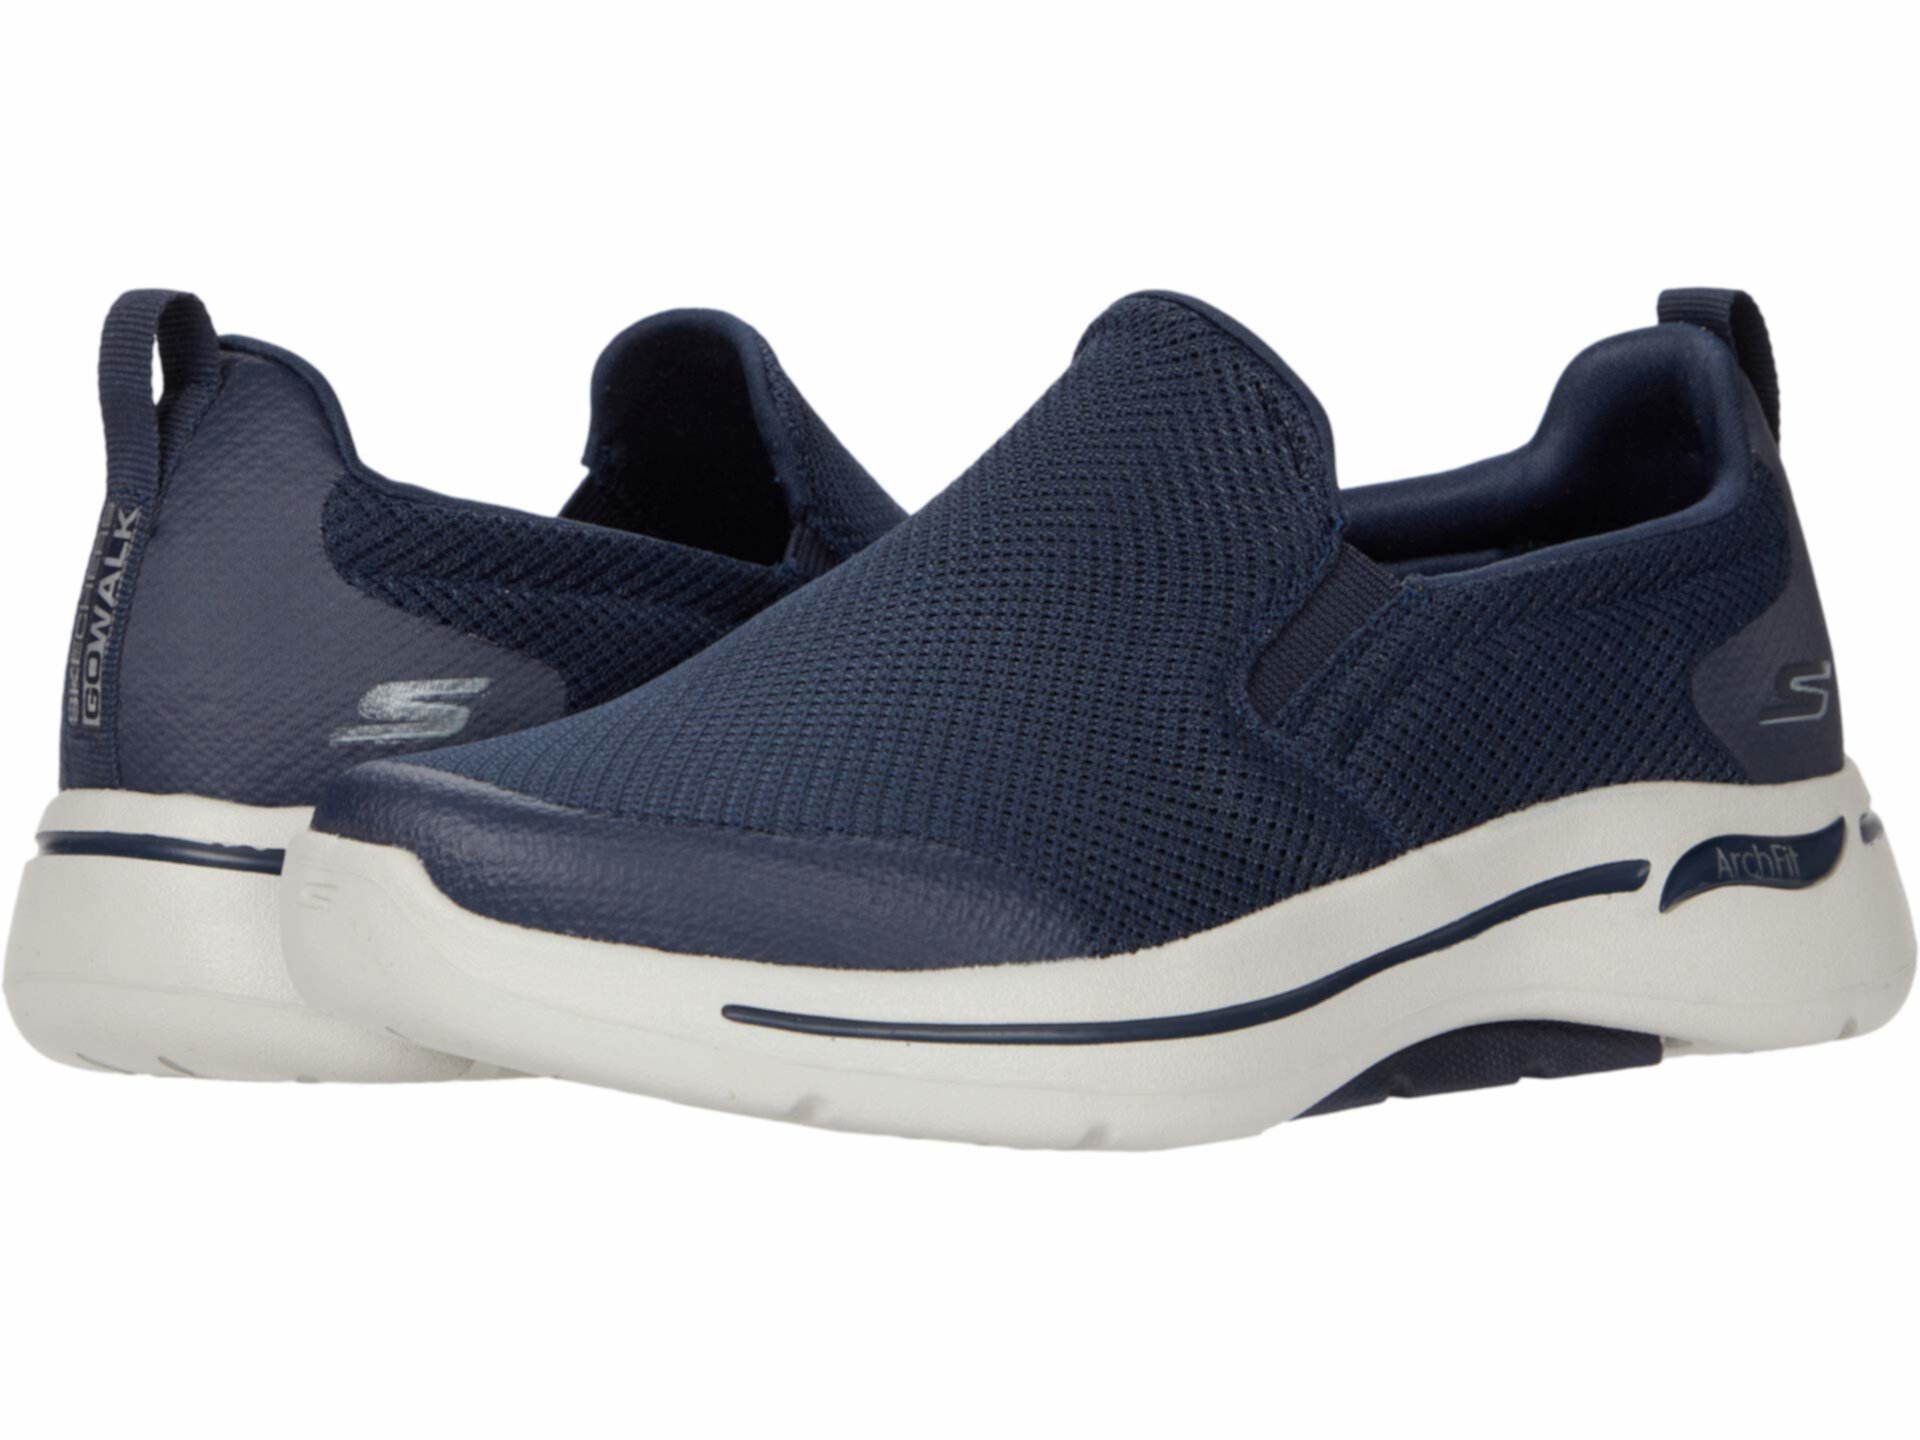 Go Walk Arch Fit - Togpath SKECHERS Performance